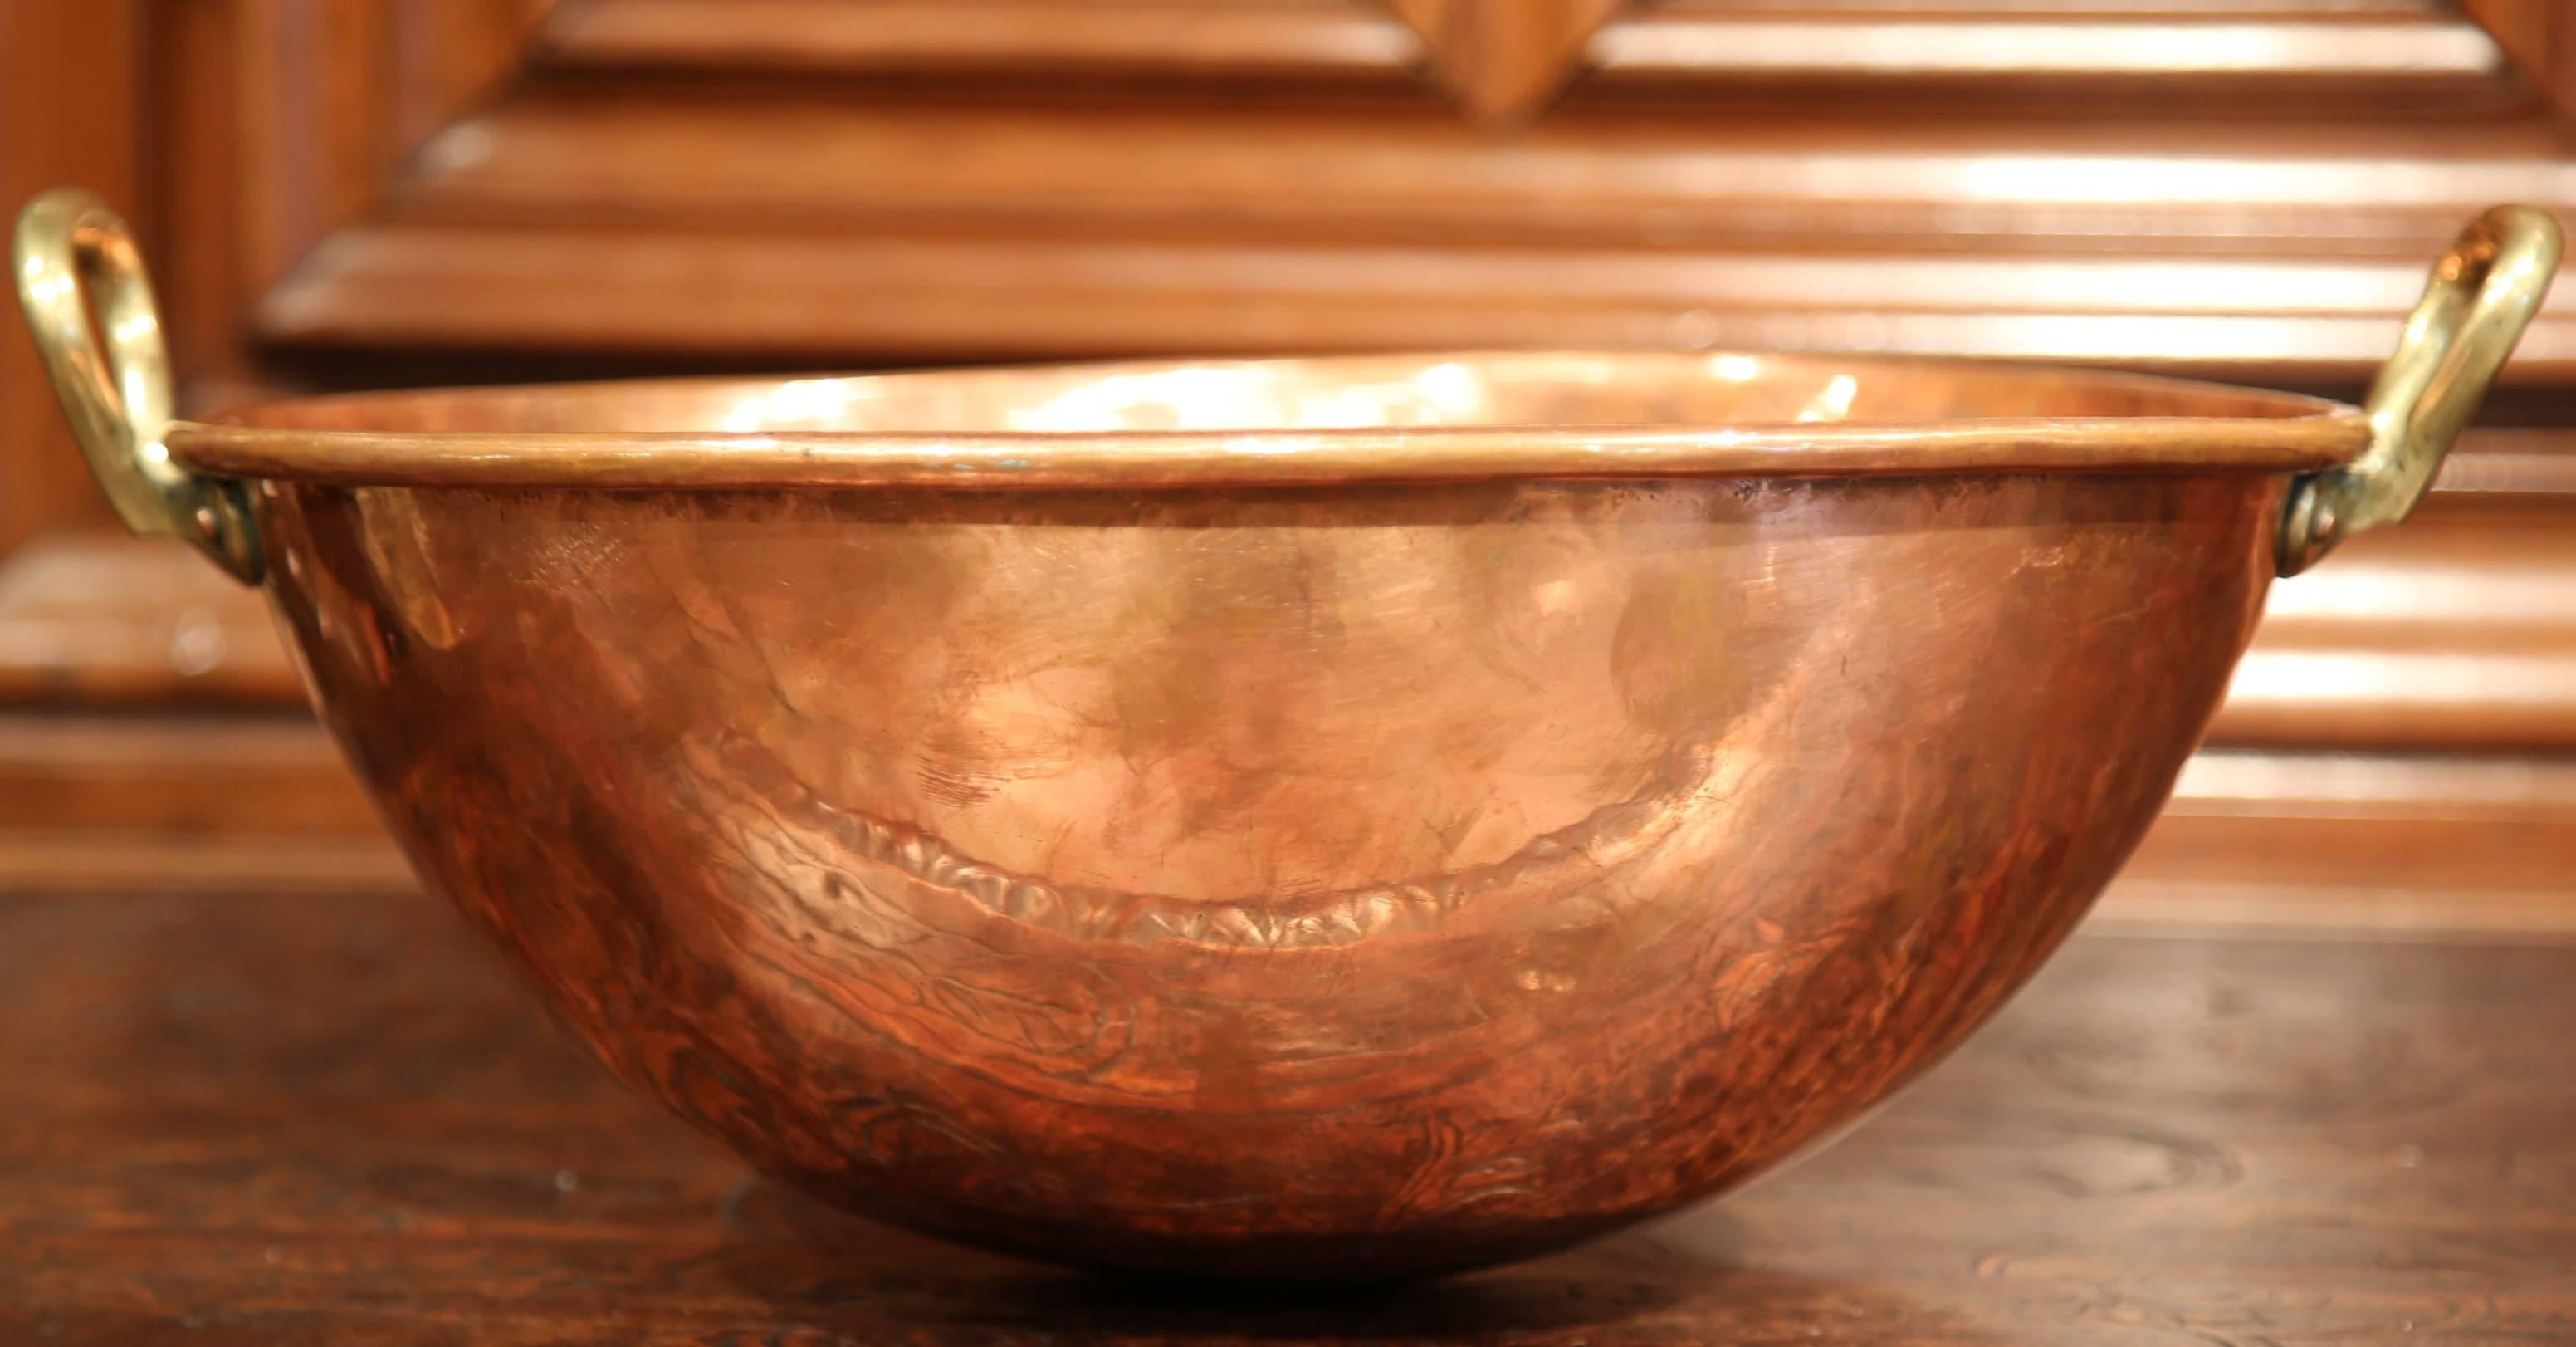 Hand-Crafted 19th Century French Patinated Copper Round Jelly Bowl with Handles